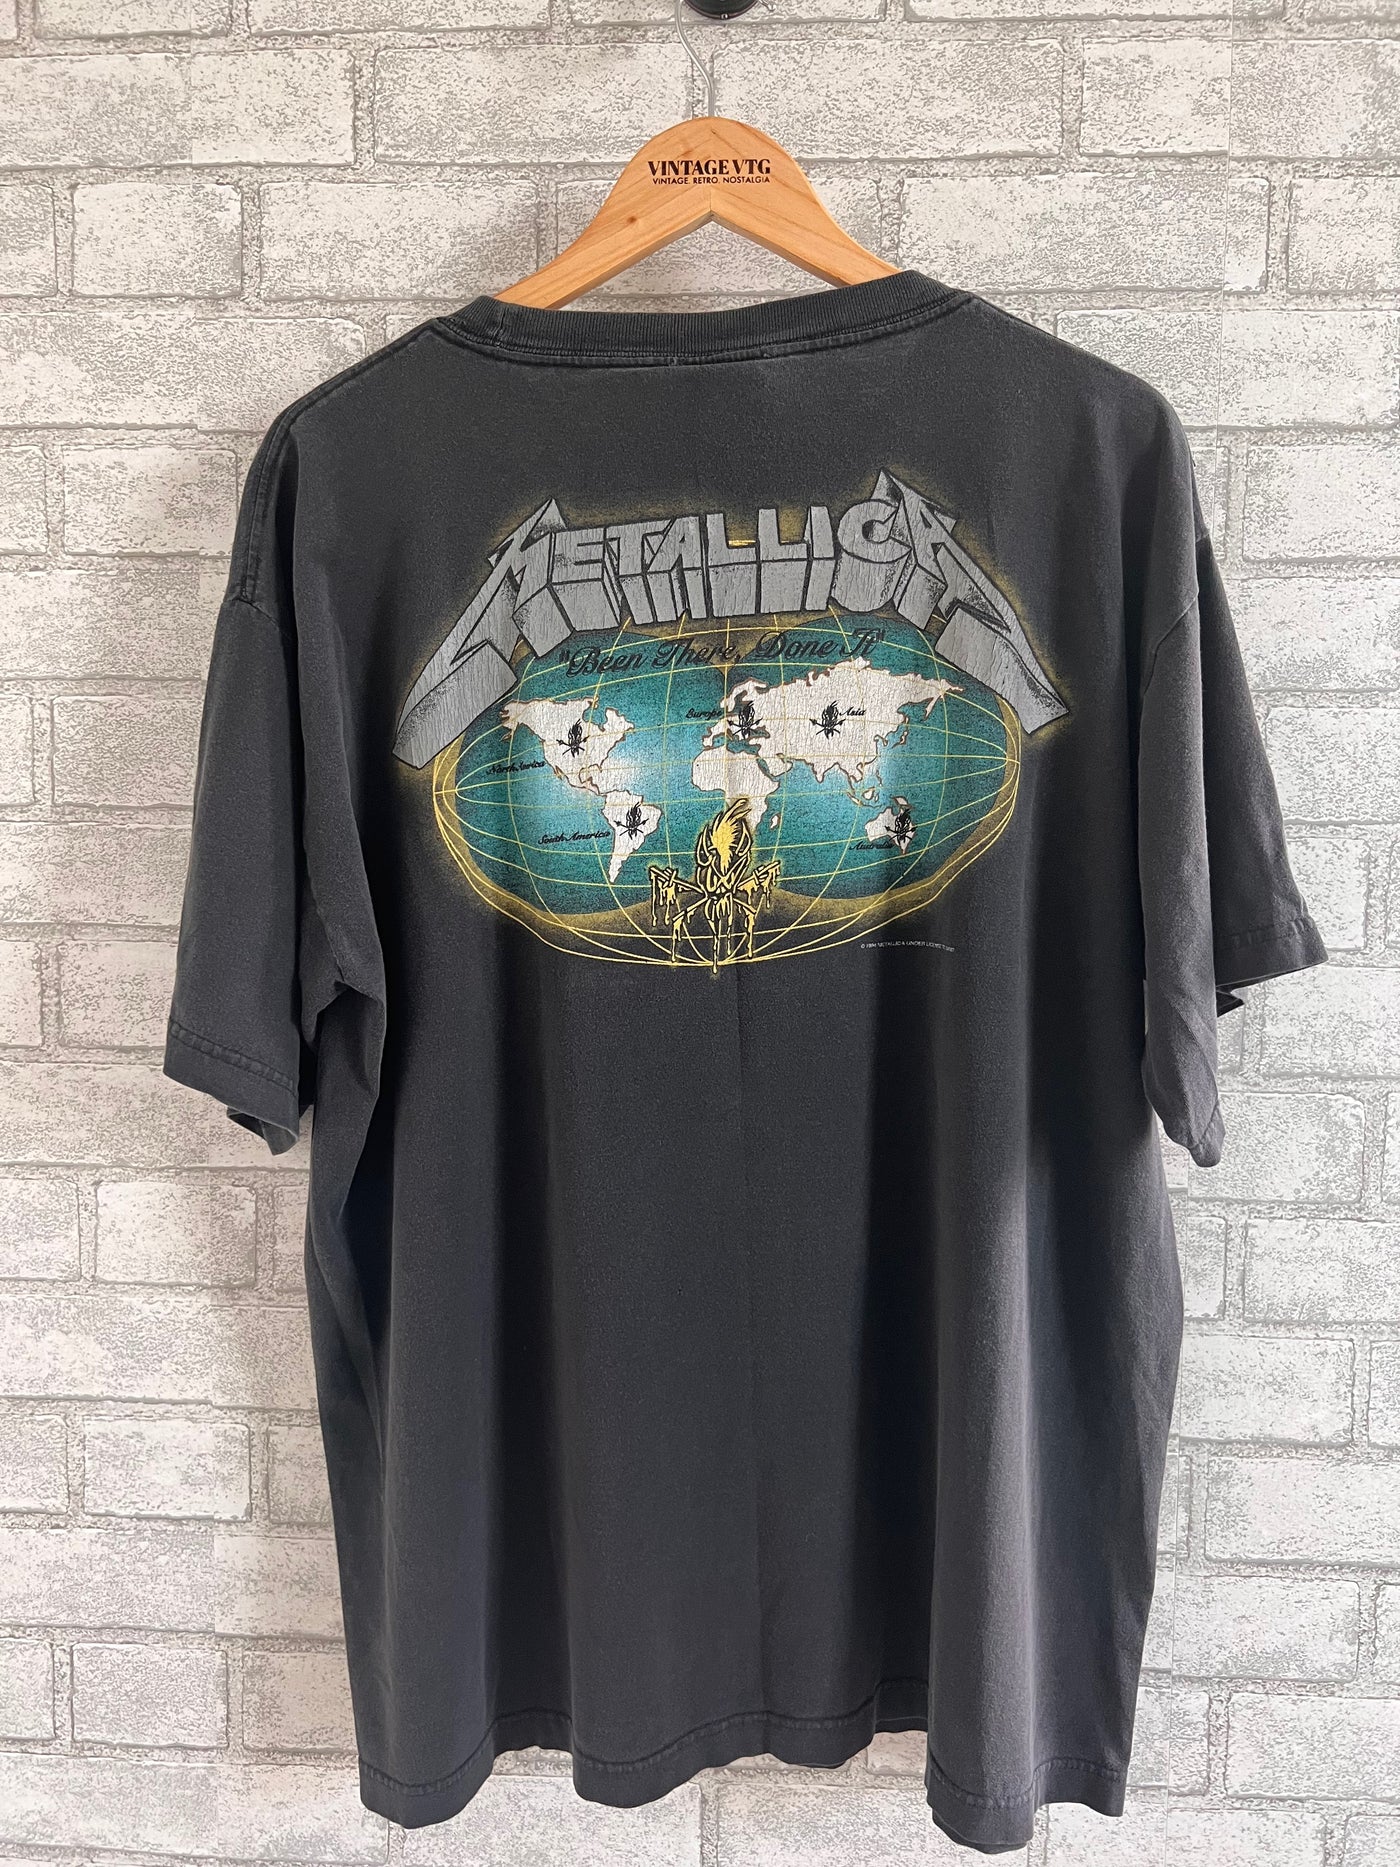 Rare Vintage Metallica 1994 Metallica "Been There Done That" Shirt. XL